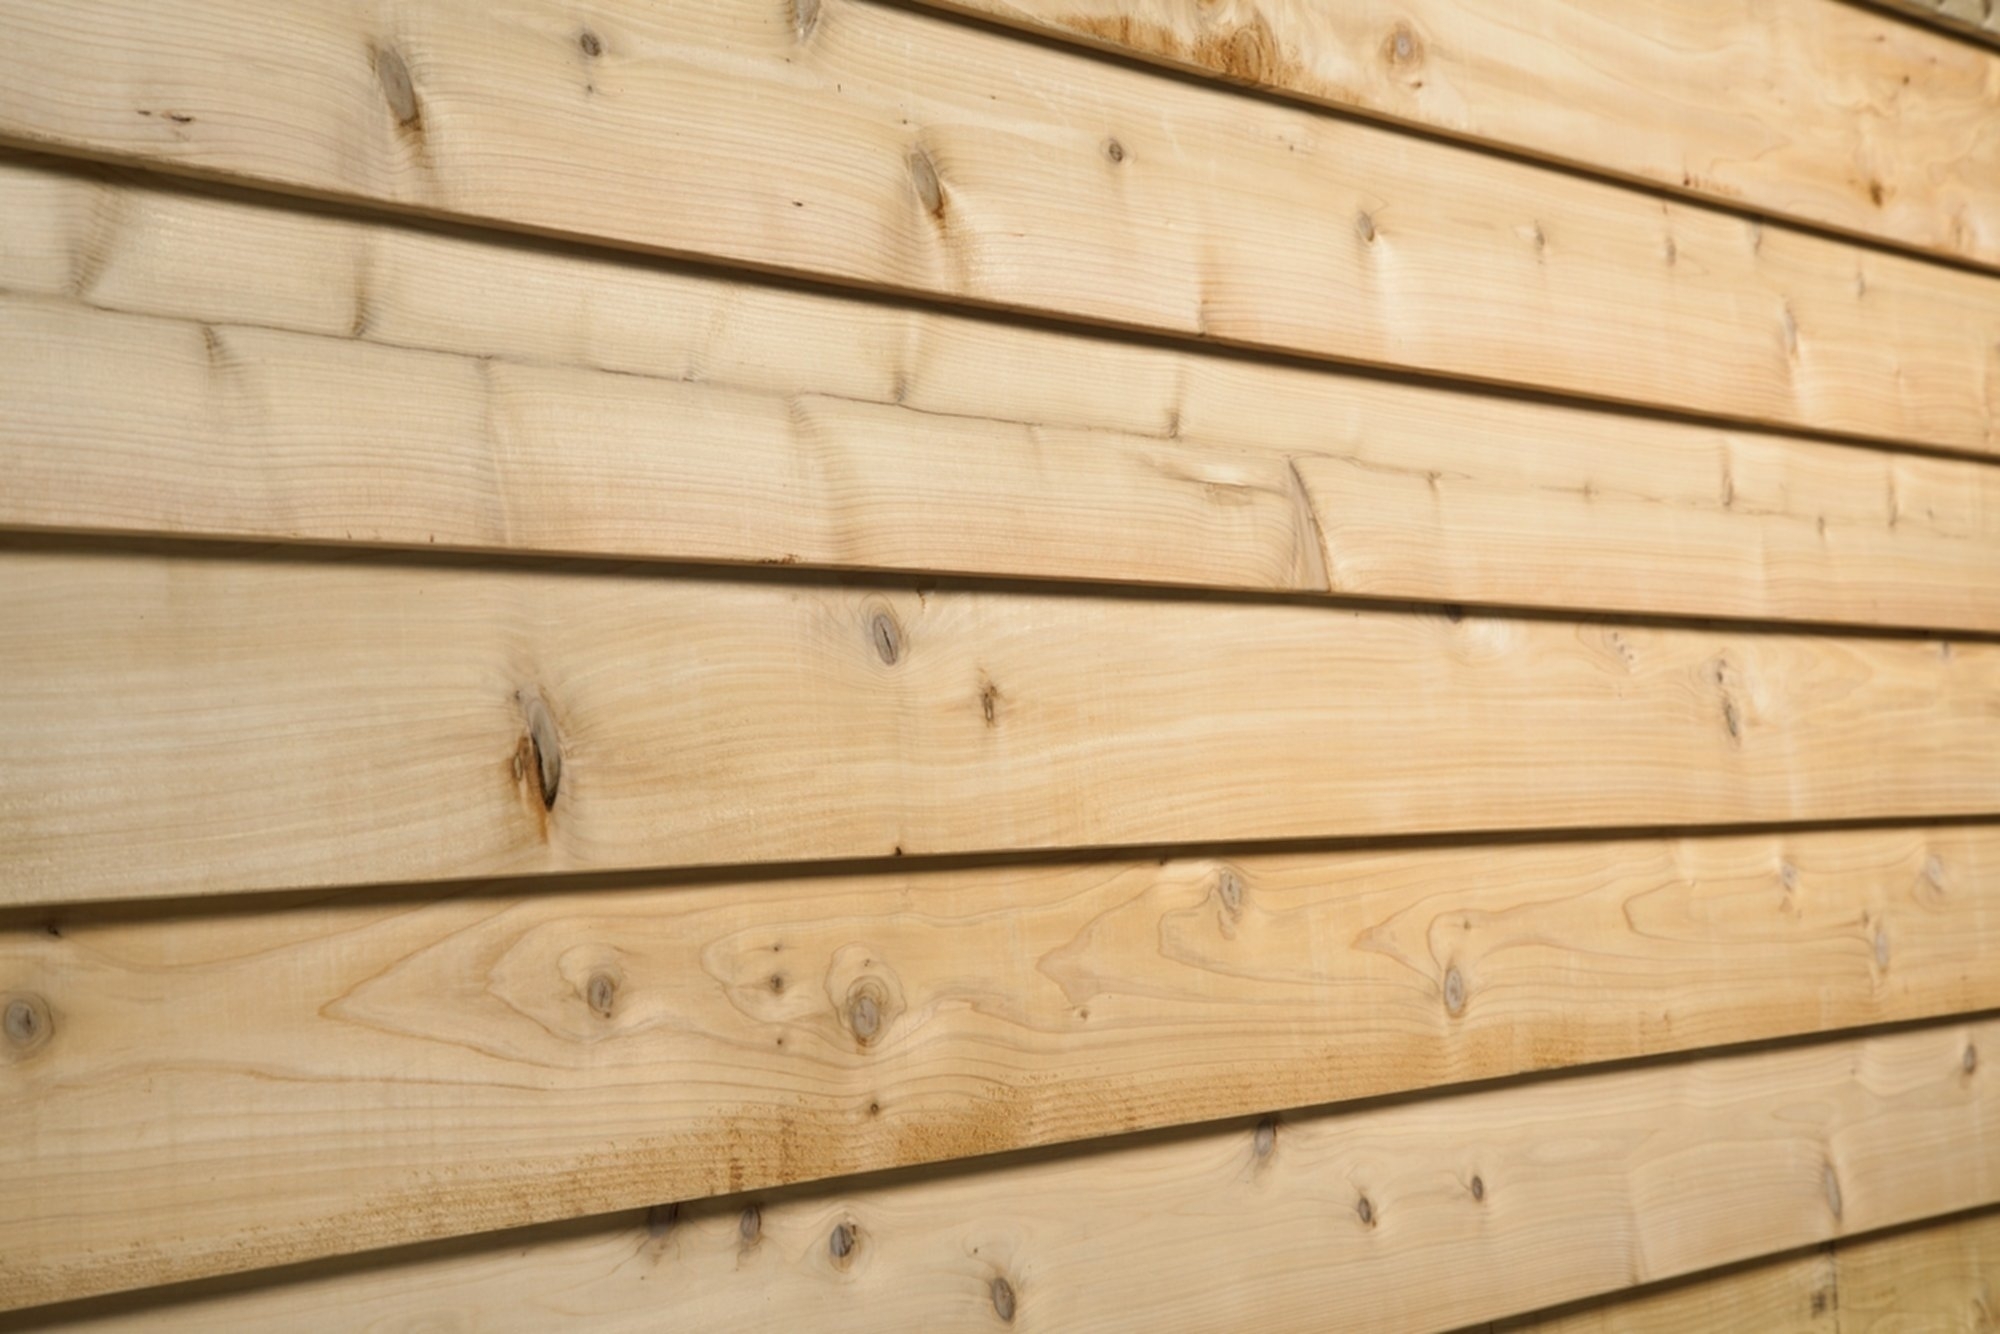 What can I substitute for cedar siding?